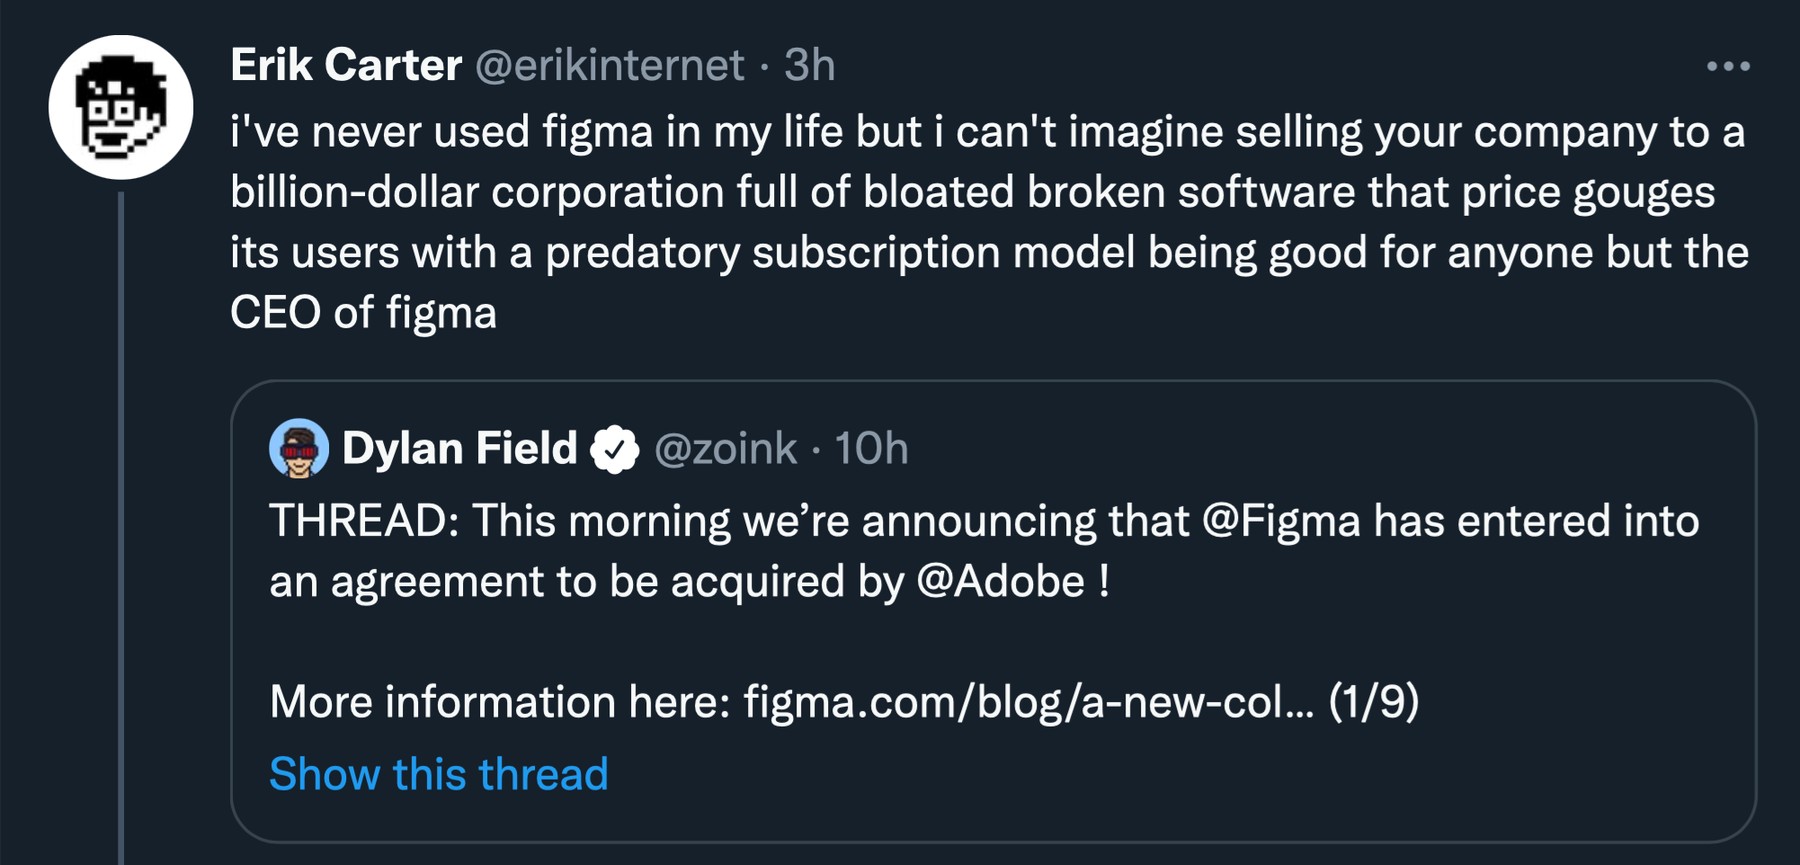 i've never used figma in my life but i can't imagine selling your company to a billion-dollar corporation full of bloated broken software that price gouges its users with a predatory subscription model being good for anyone but the CEO of figma